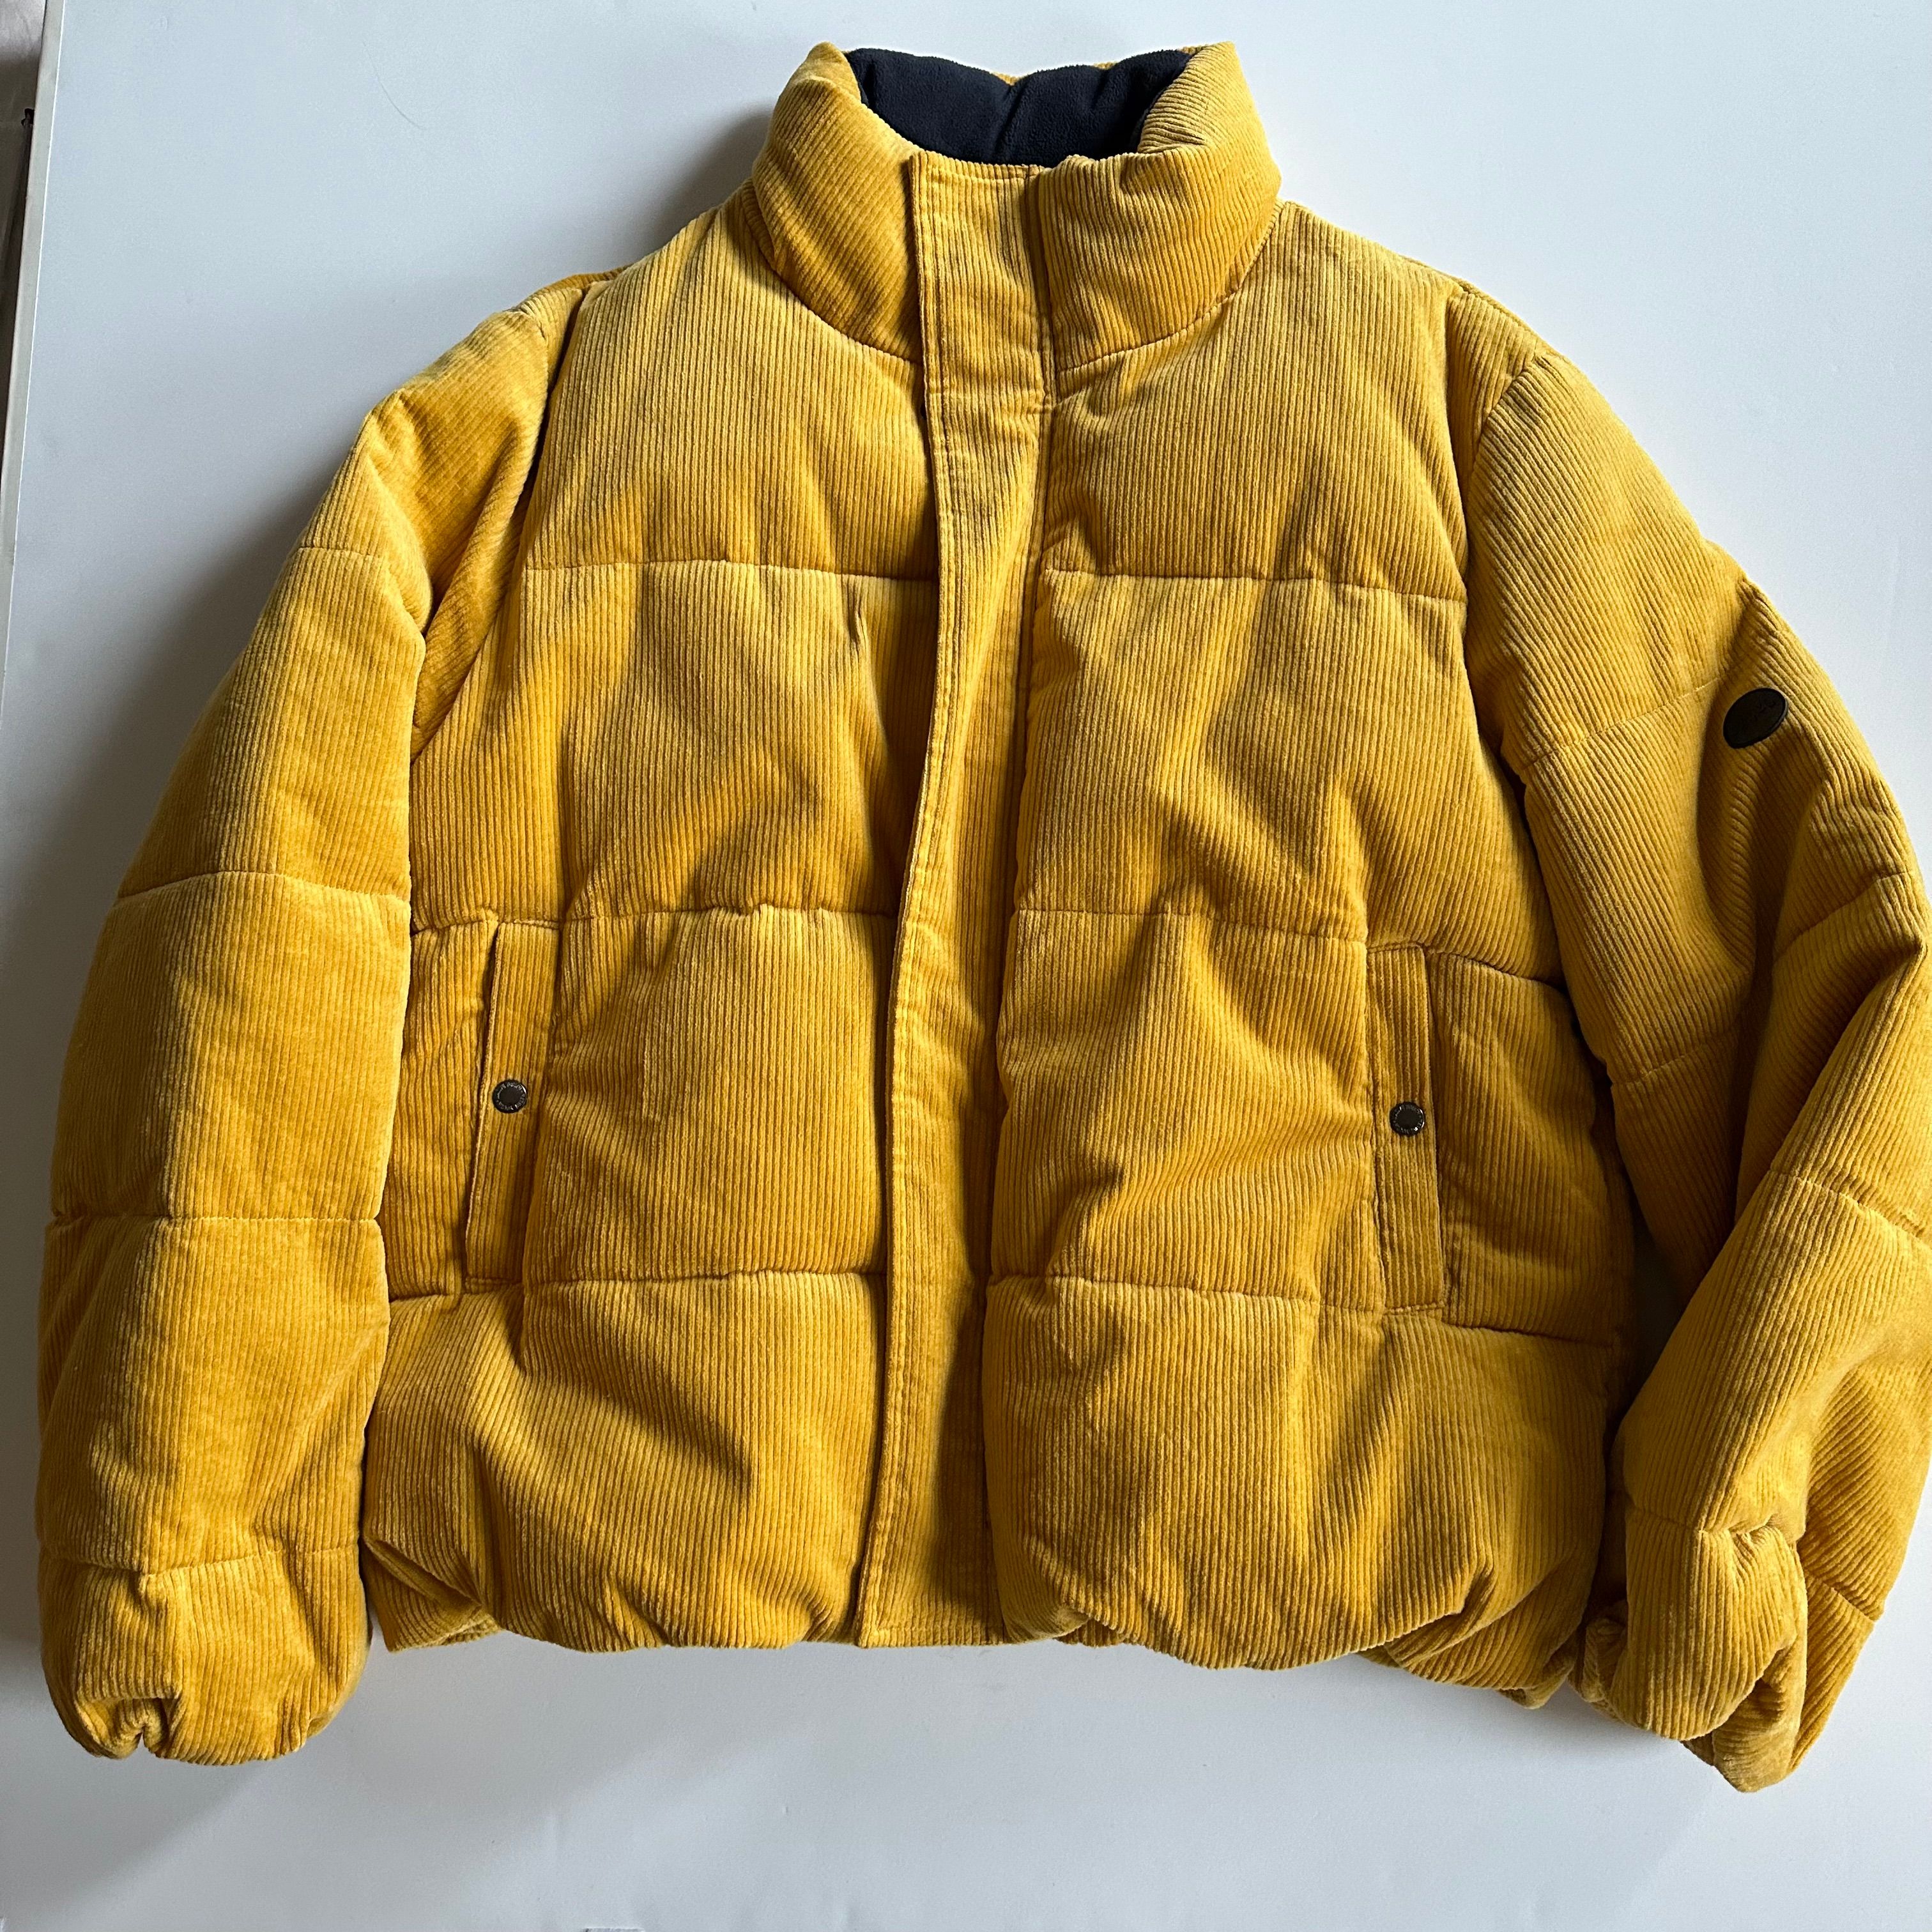 Native Youth NATIVE YOUTH Yellow Pathfinder Corduroy Puffer Jacket Size US XL / EU 56 / 4 - 2 Preview